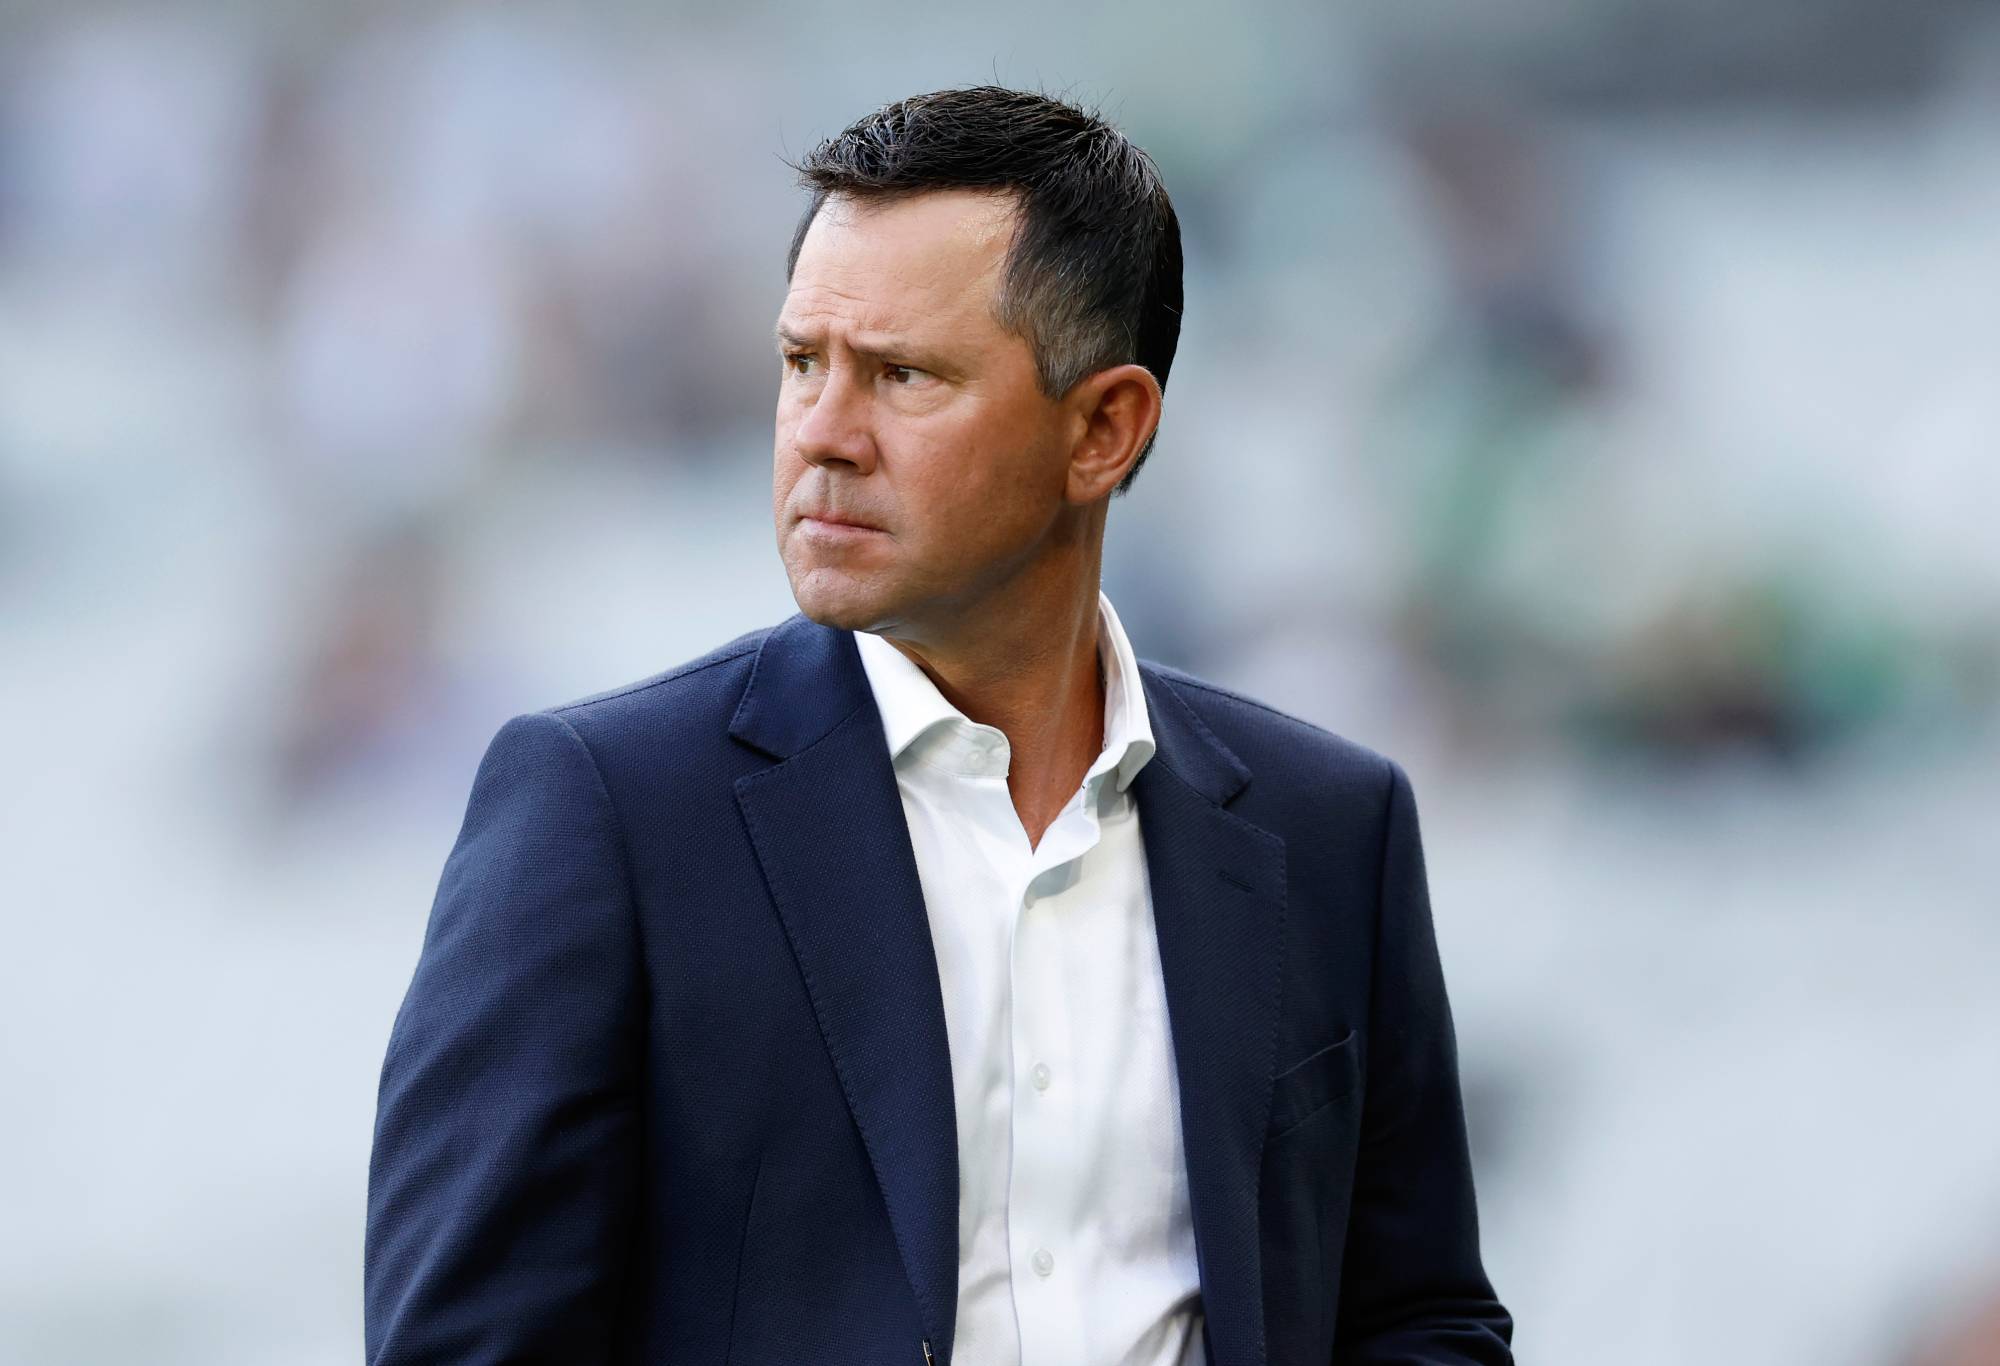 MELBOURNE, AUSTRALIA - JANUARY 25: Cricket commentator and former Australian Cricket captain Ricky Ponting walks across the M.C.G. before the Men's Big Bash League match between the Melbourne Stars and the Sydney Thunder at Melbourne Cricket Ground, on January 25, 2023, in Melbourne, Australia. (Photo by Darrian Traynor/Getty Images)